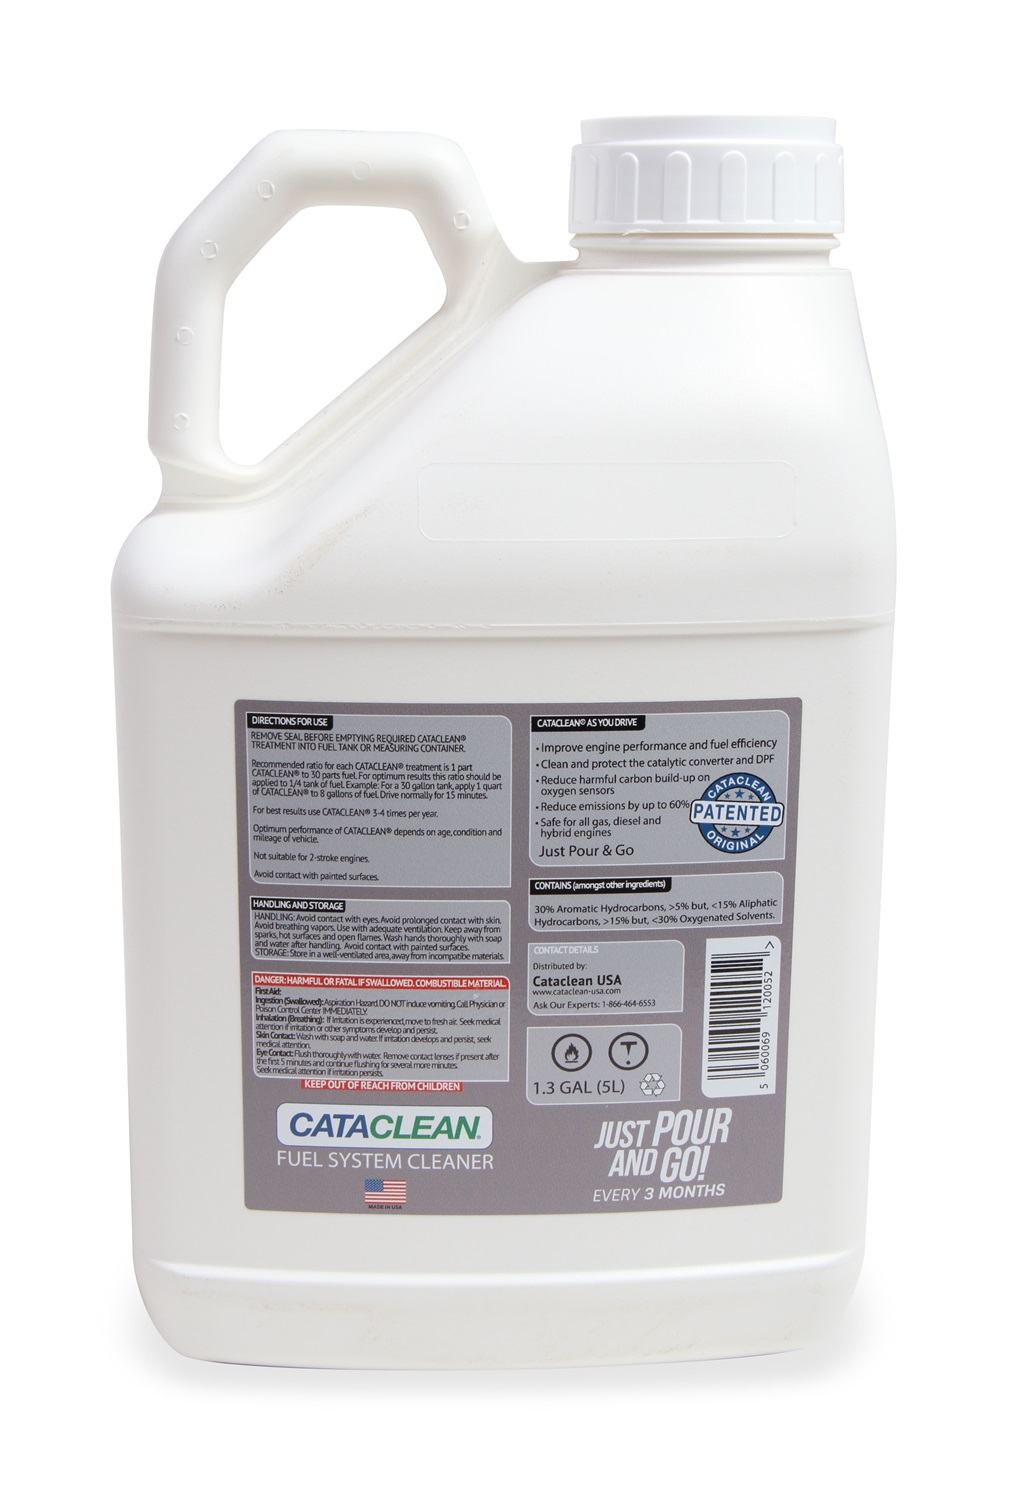 Mr. Gasket 120009 Cataclean Fuel And Exhaust System Cleaner; 5 L. Bottle;  For Truck/Fleet/Industrial Use; Safe for Gasoline/Diesel/Hybrid Vehicles;